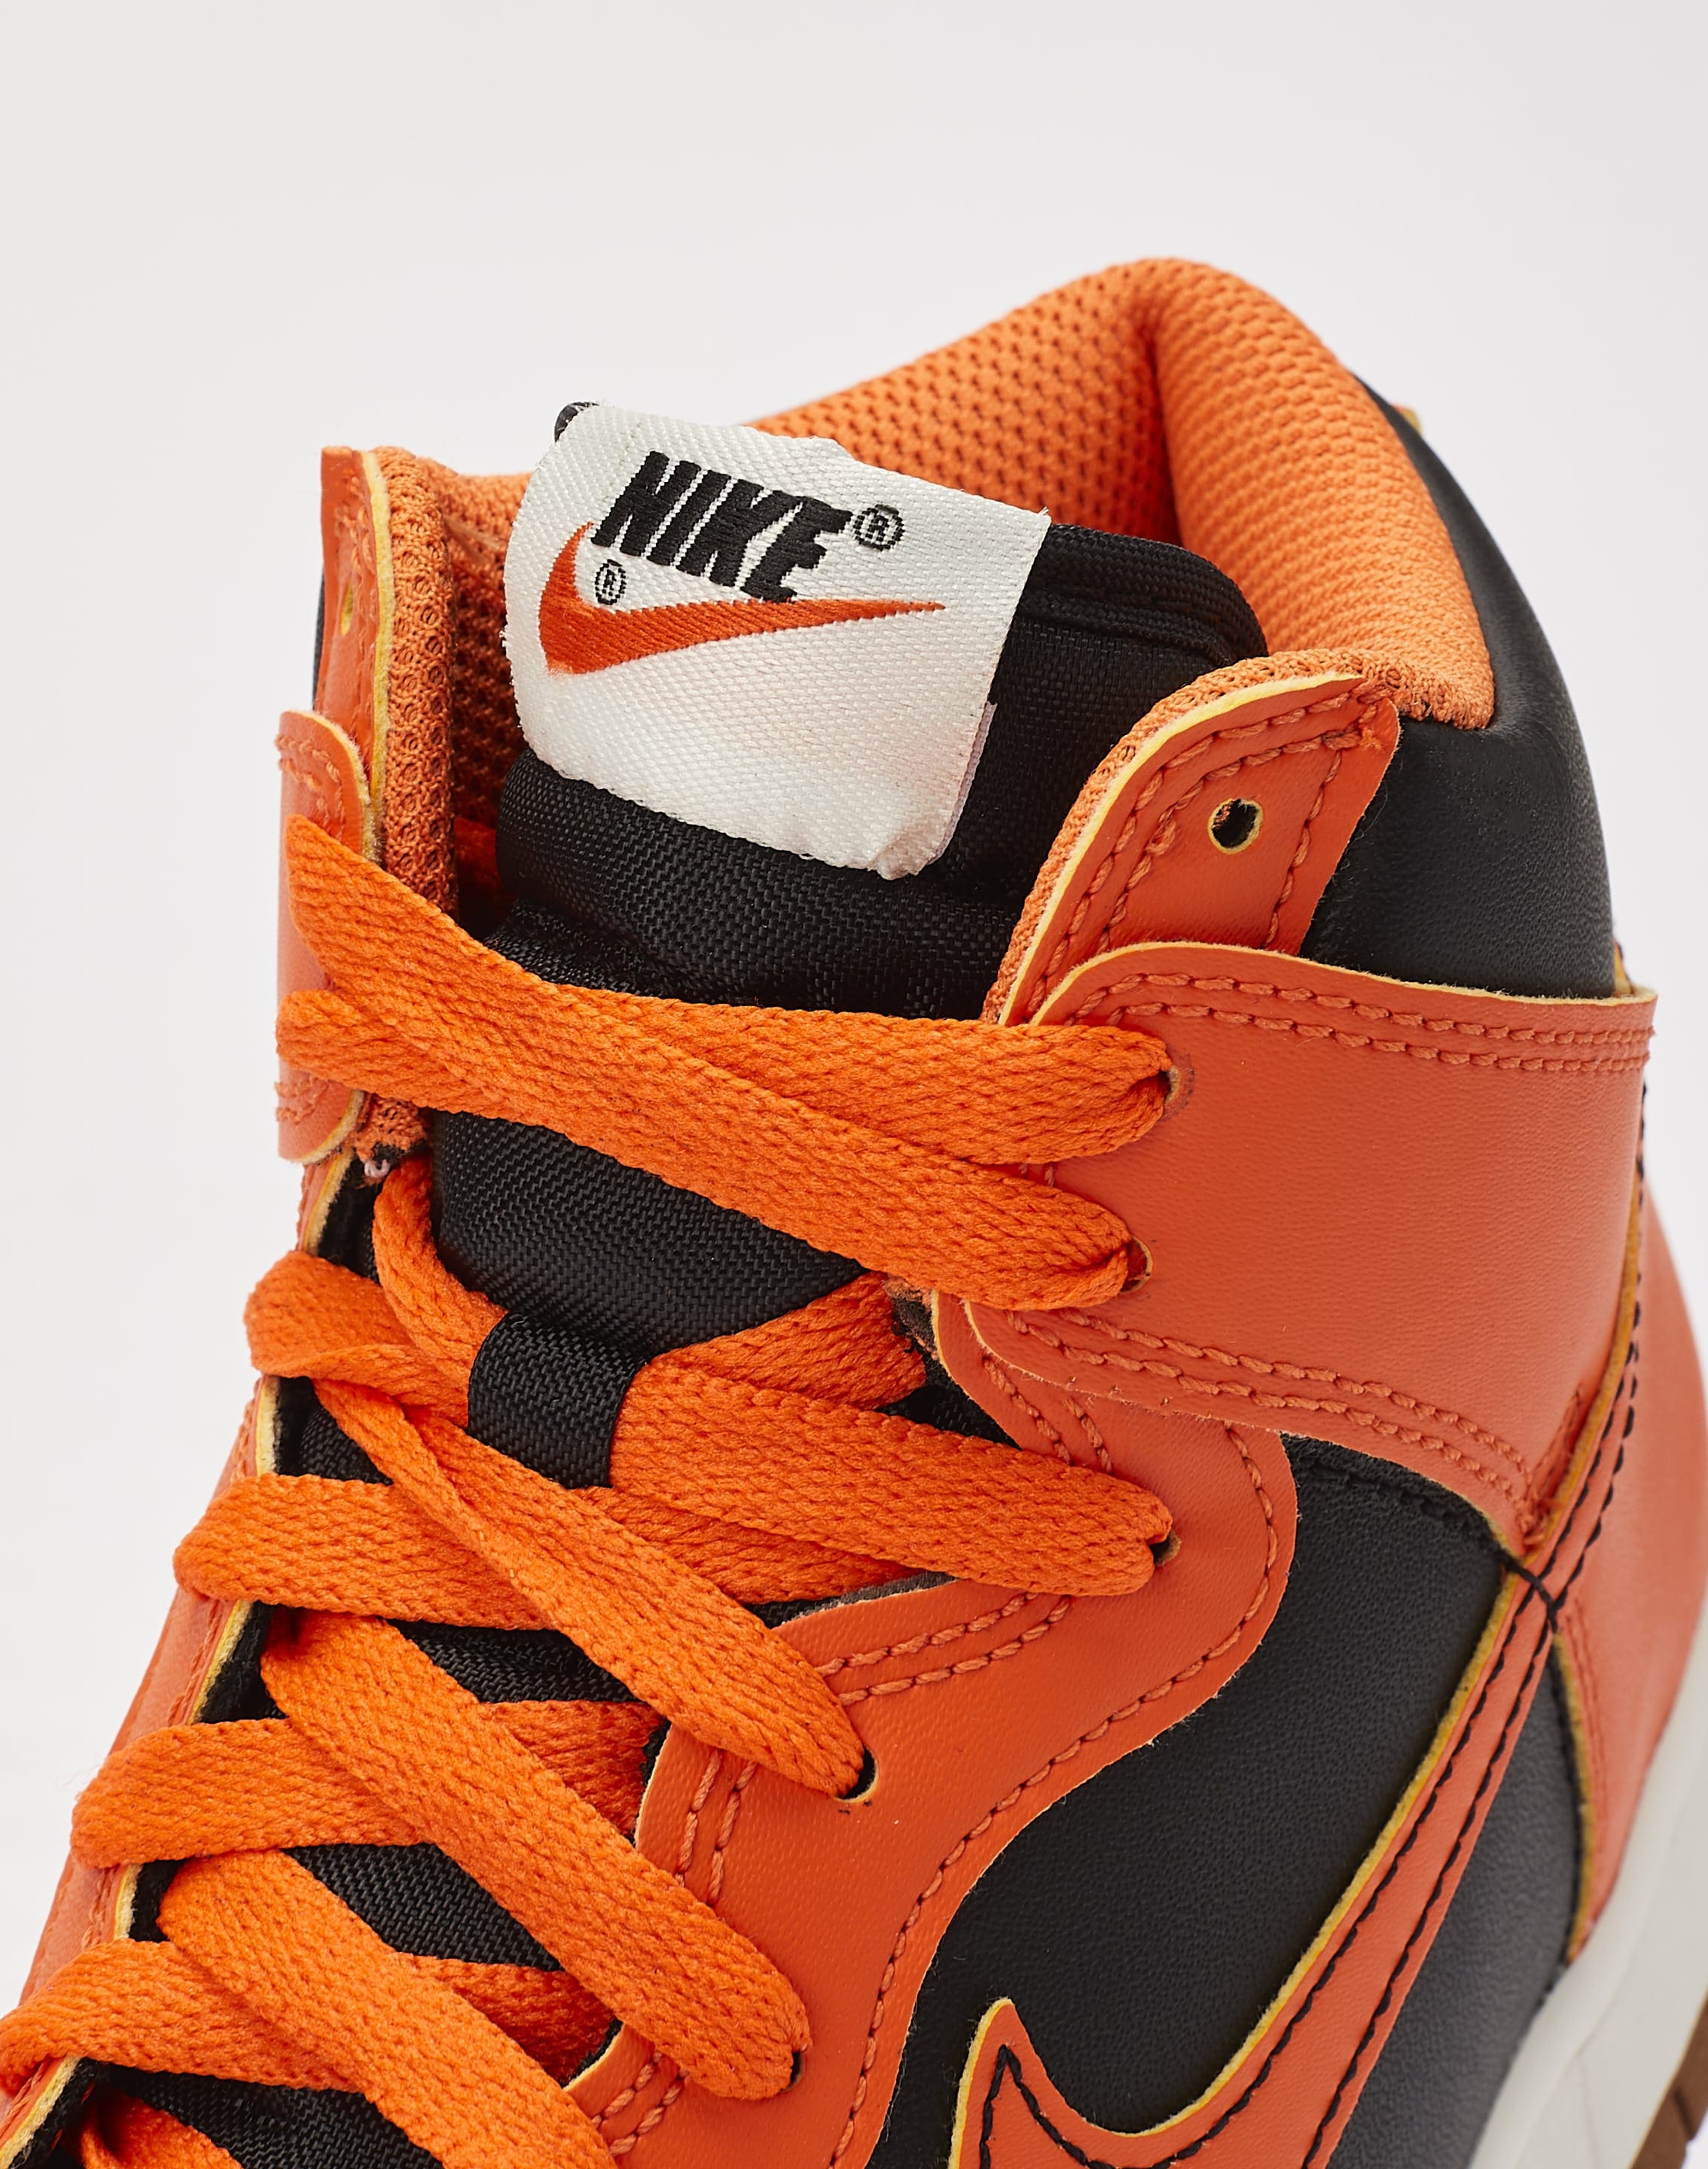 Nike Dunk High Black Safety Orange (GS) Raffles and Release Date